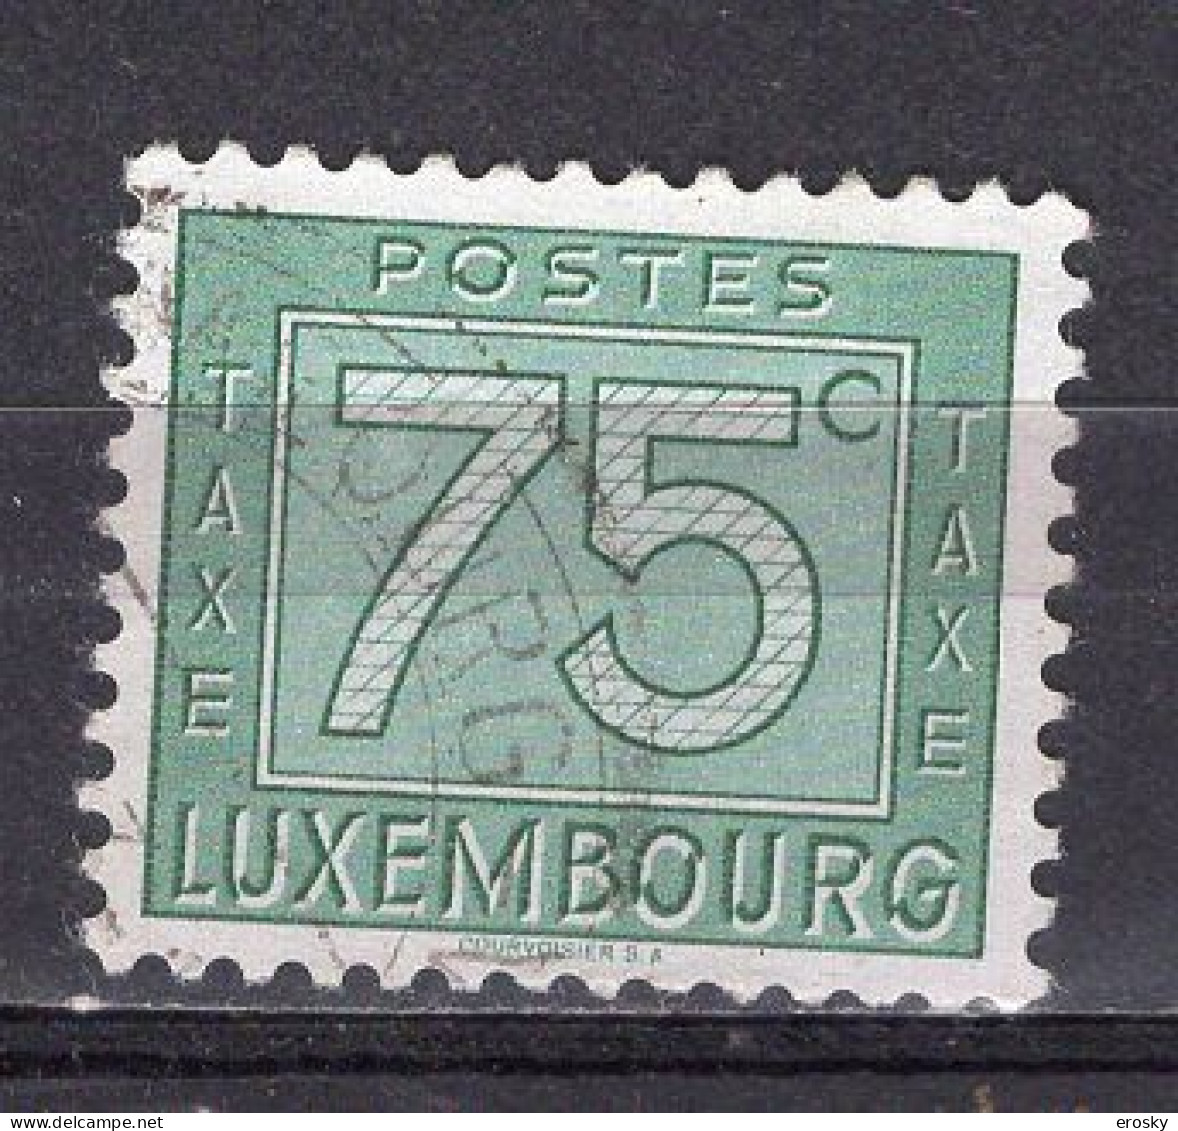 Q4499 - LUXEMBOURG TAXE Yv N°29 - Taxes